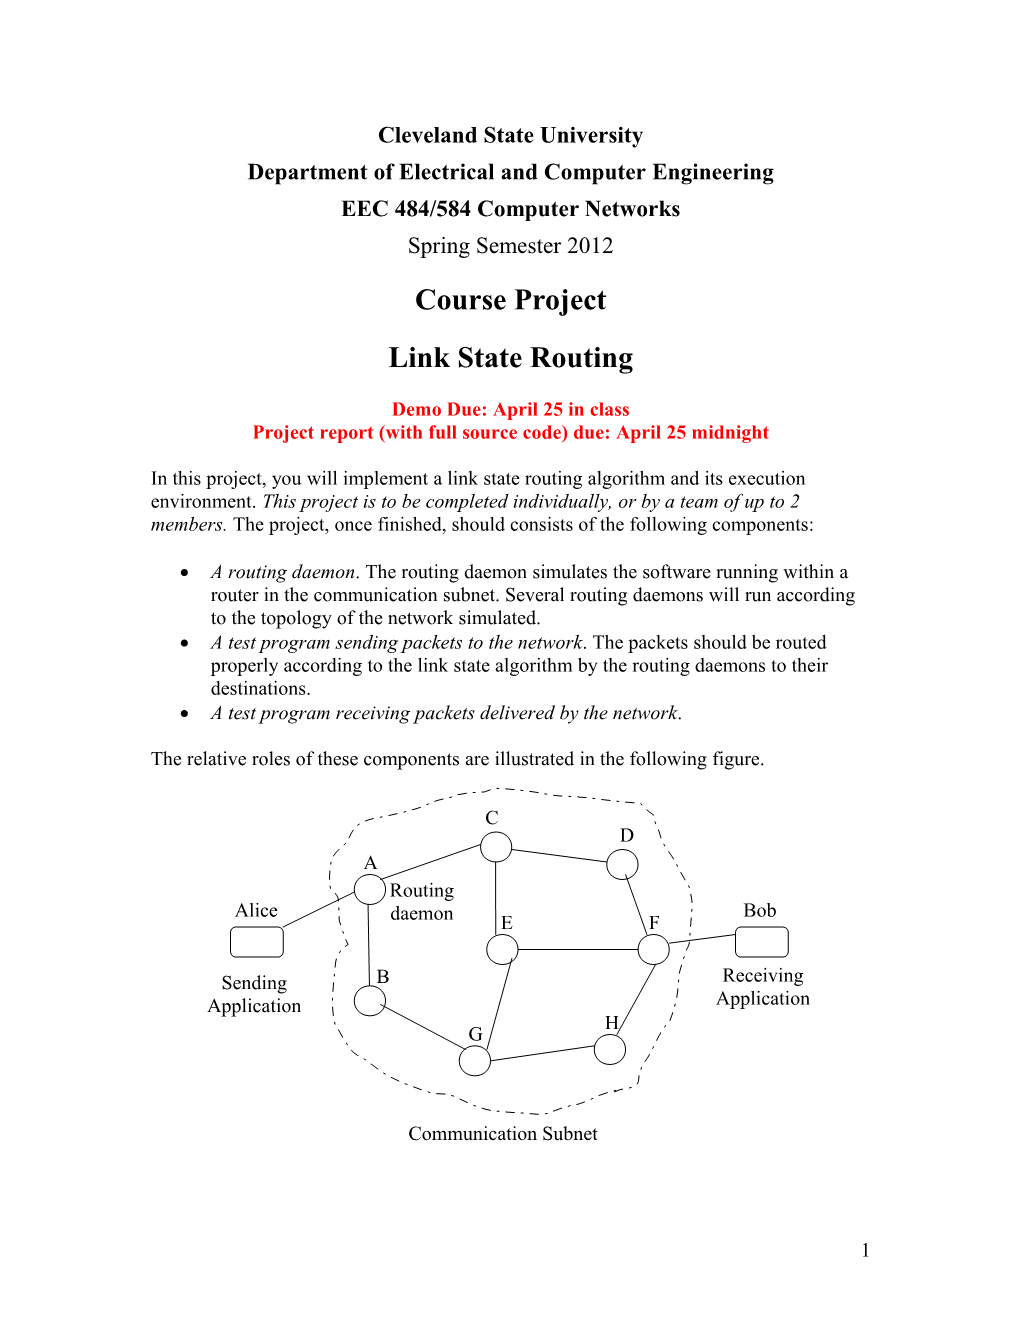 EEC484/584 Project: Link State Routing